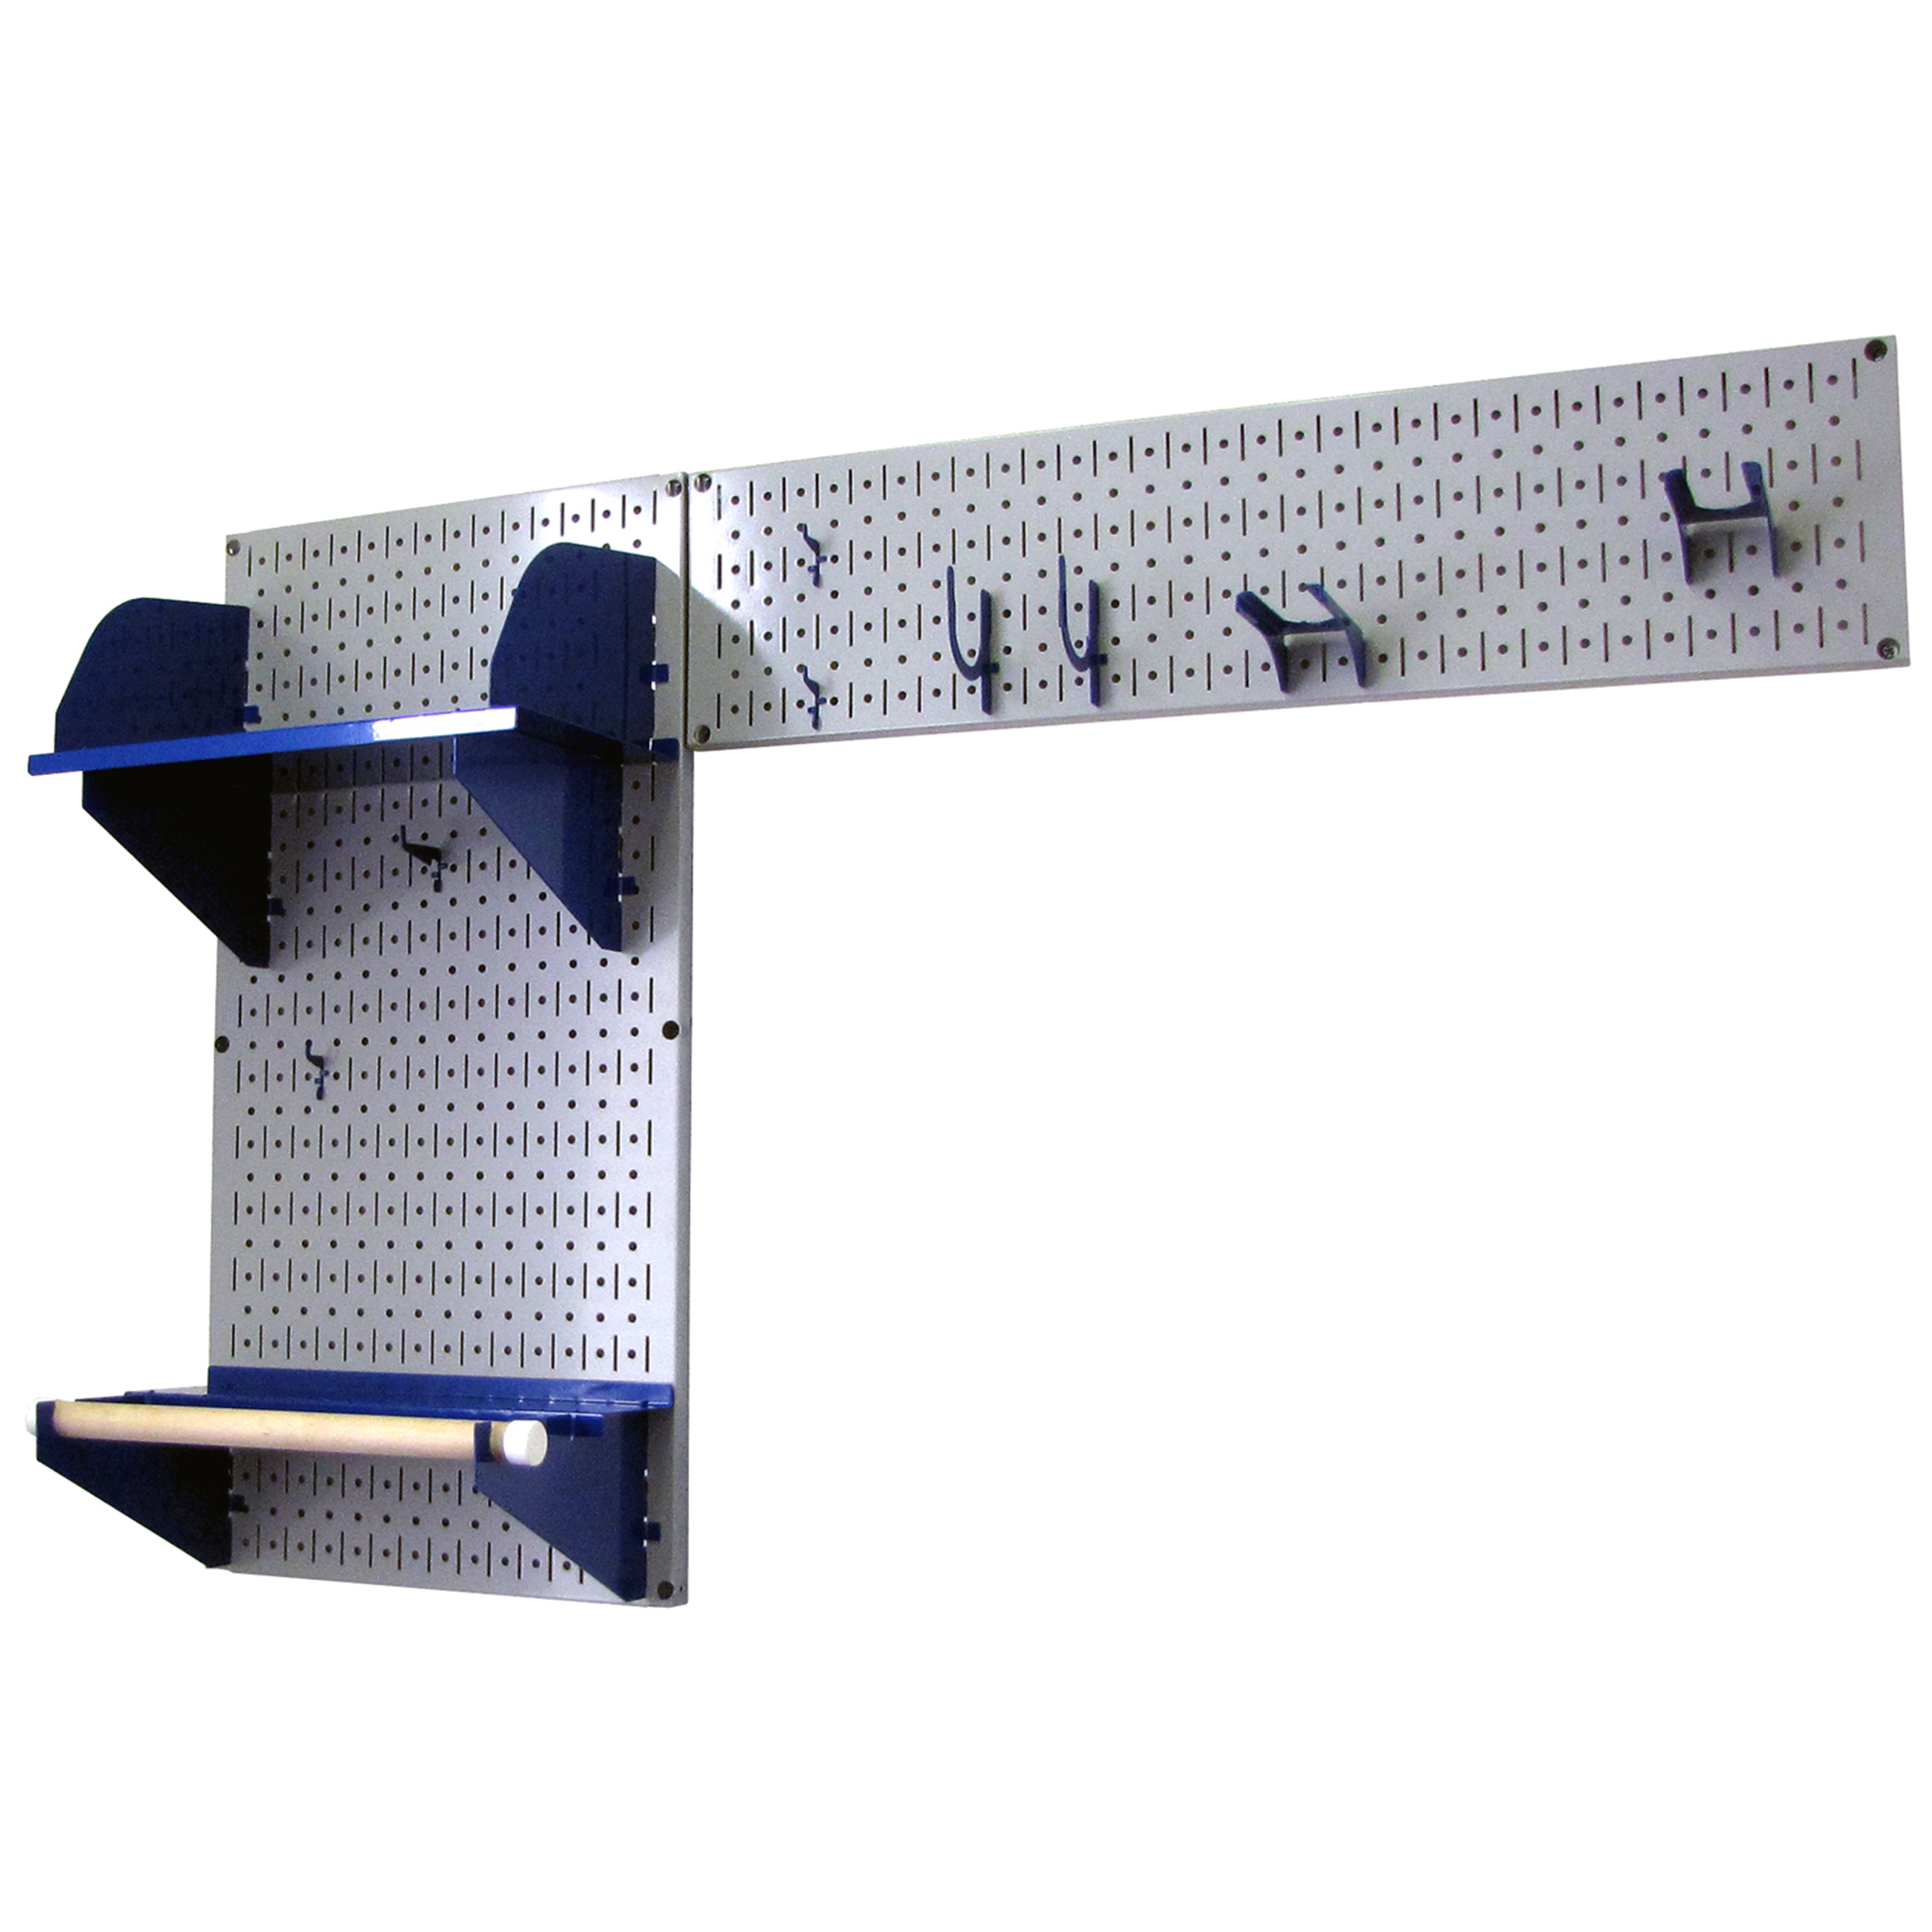 Pegboard Garden Tool Board Organizer With Gray Pegboard And Blue Accessories